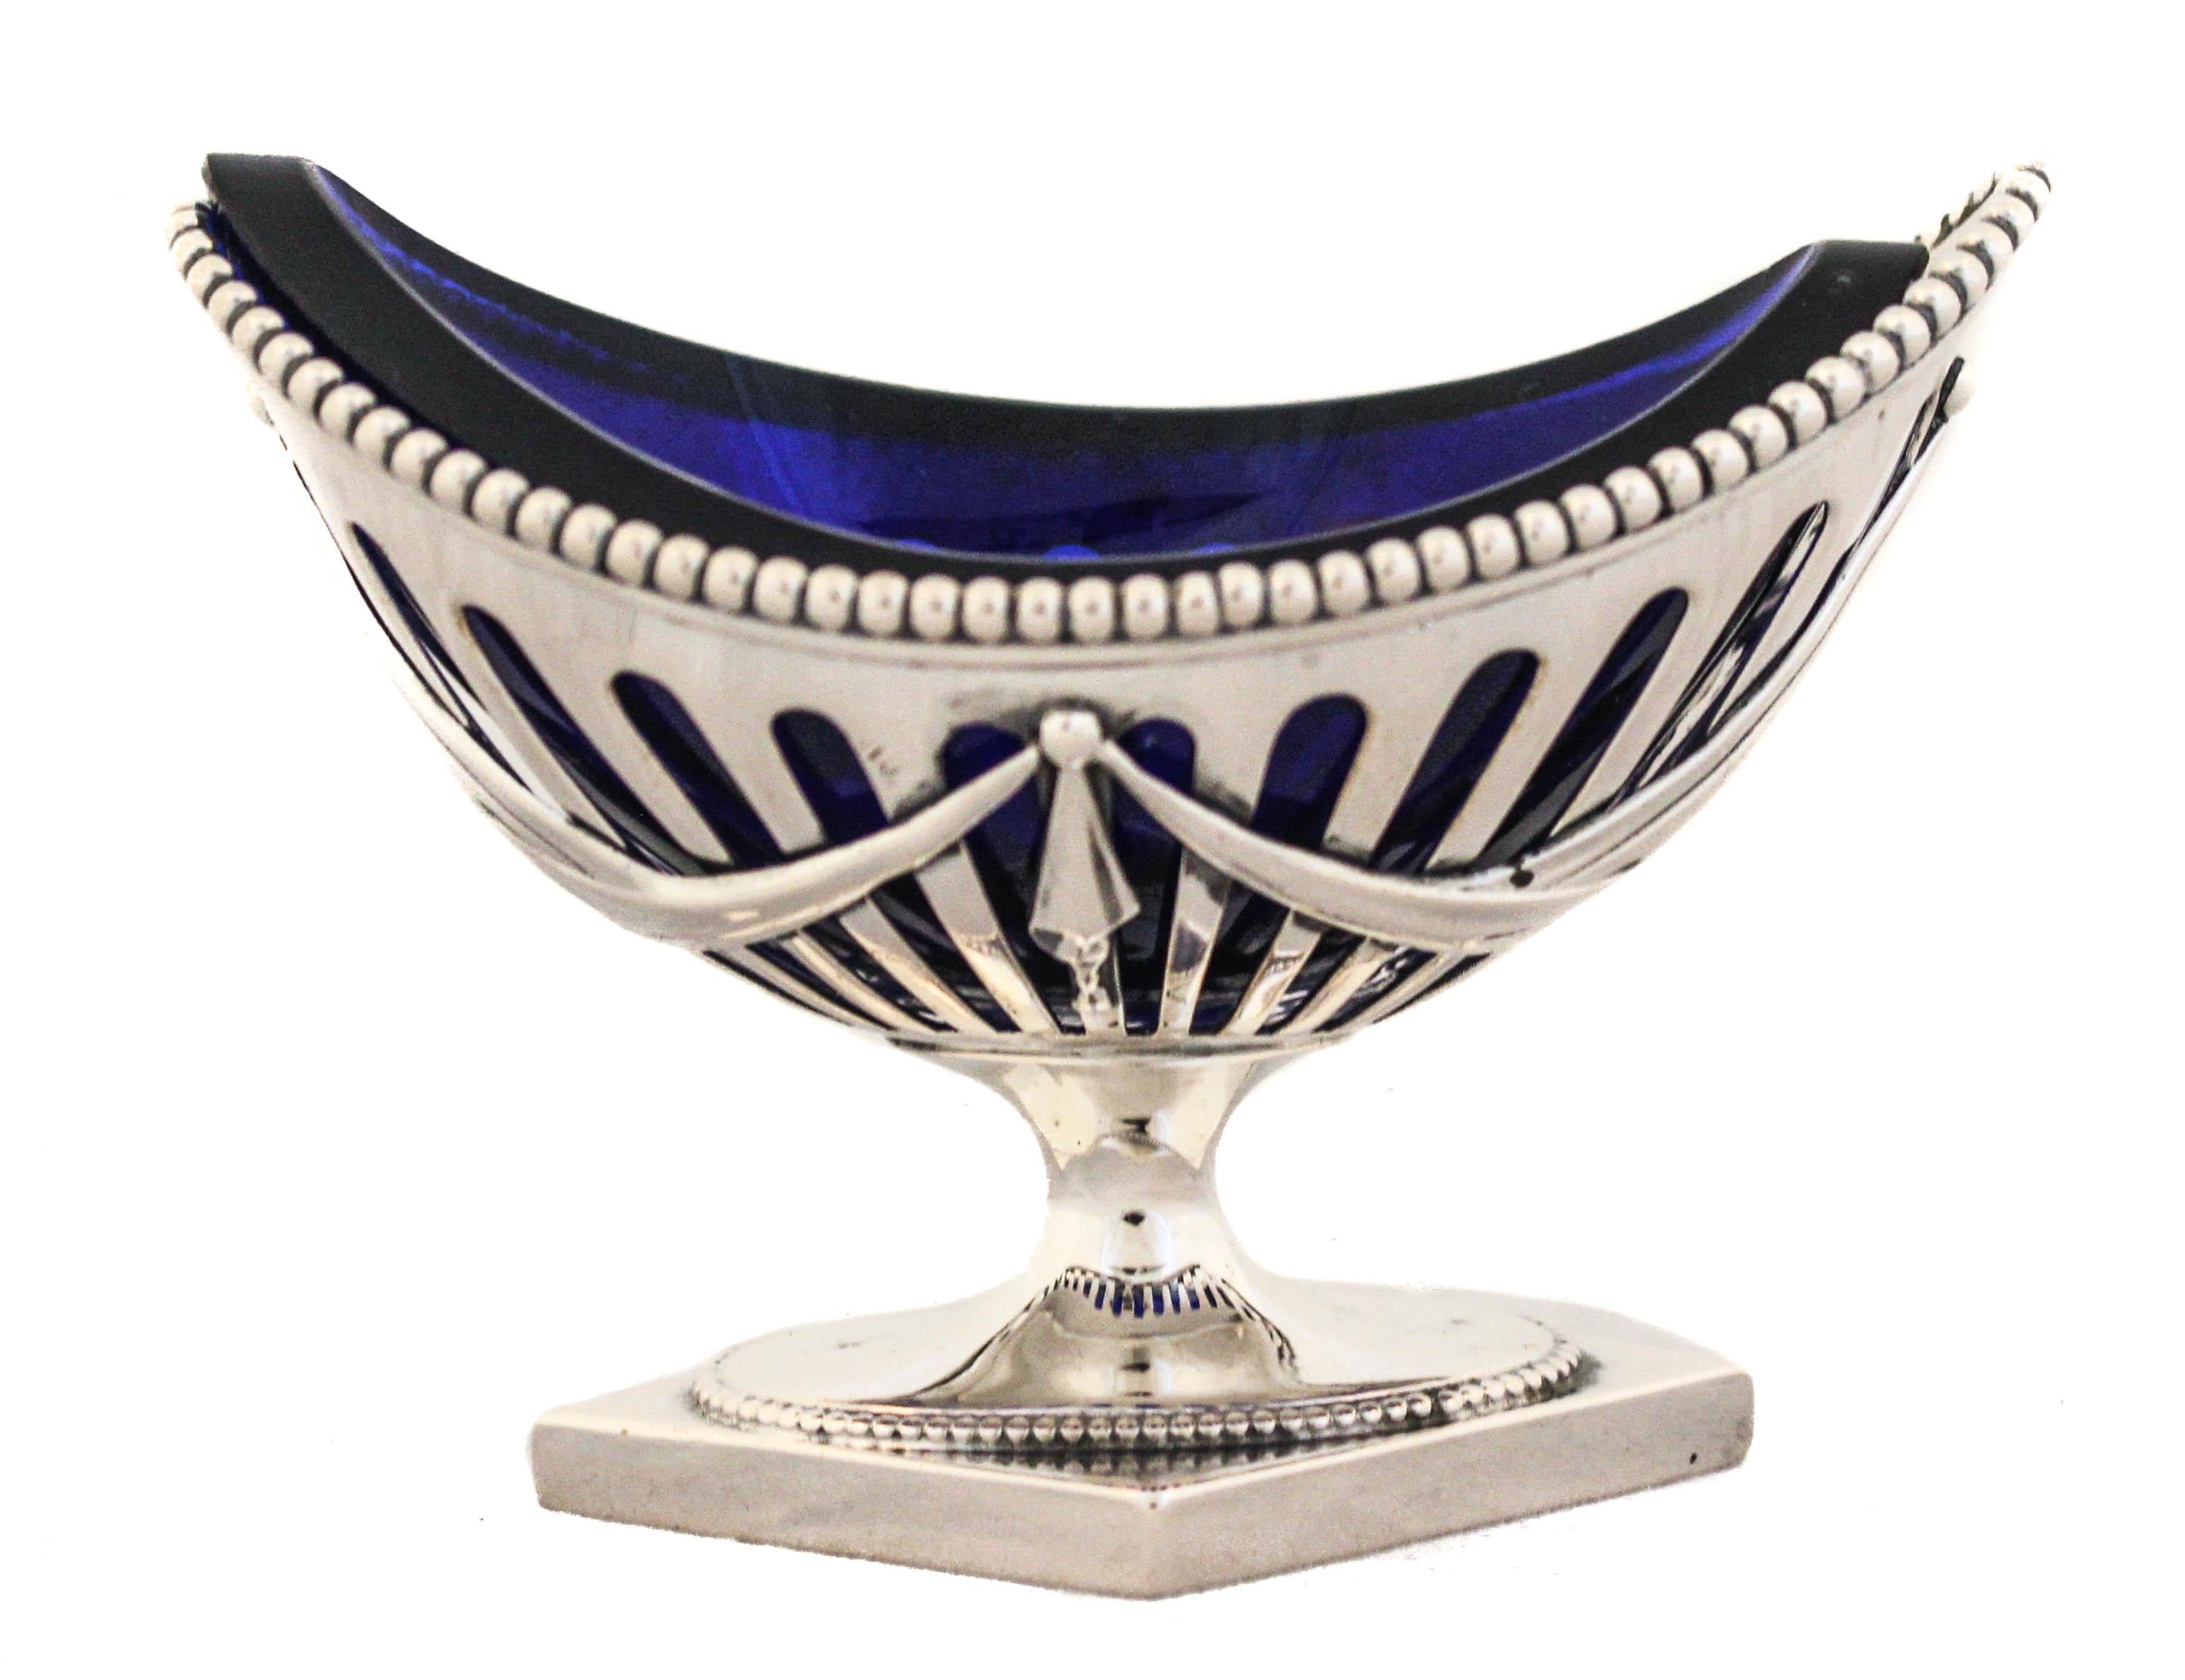 An amazing sterling silver three-piece suite: a pair of salt cellars and a matching mustard jar. Each piece has a cobalt blue liner that shows through the cutout silver. The salt cellars are oval with a diamond shaped base. A beaded design wraps